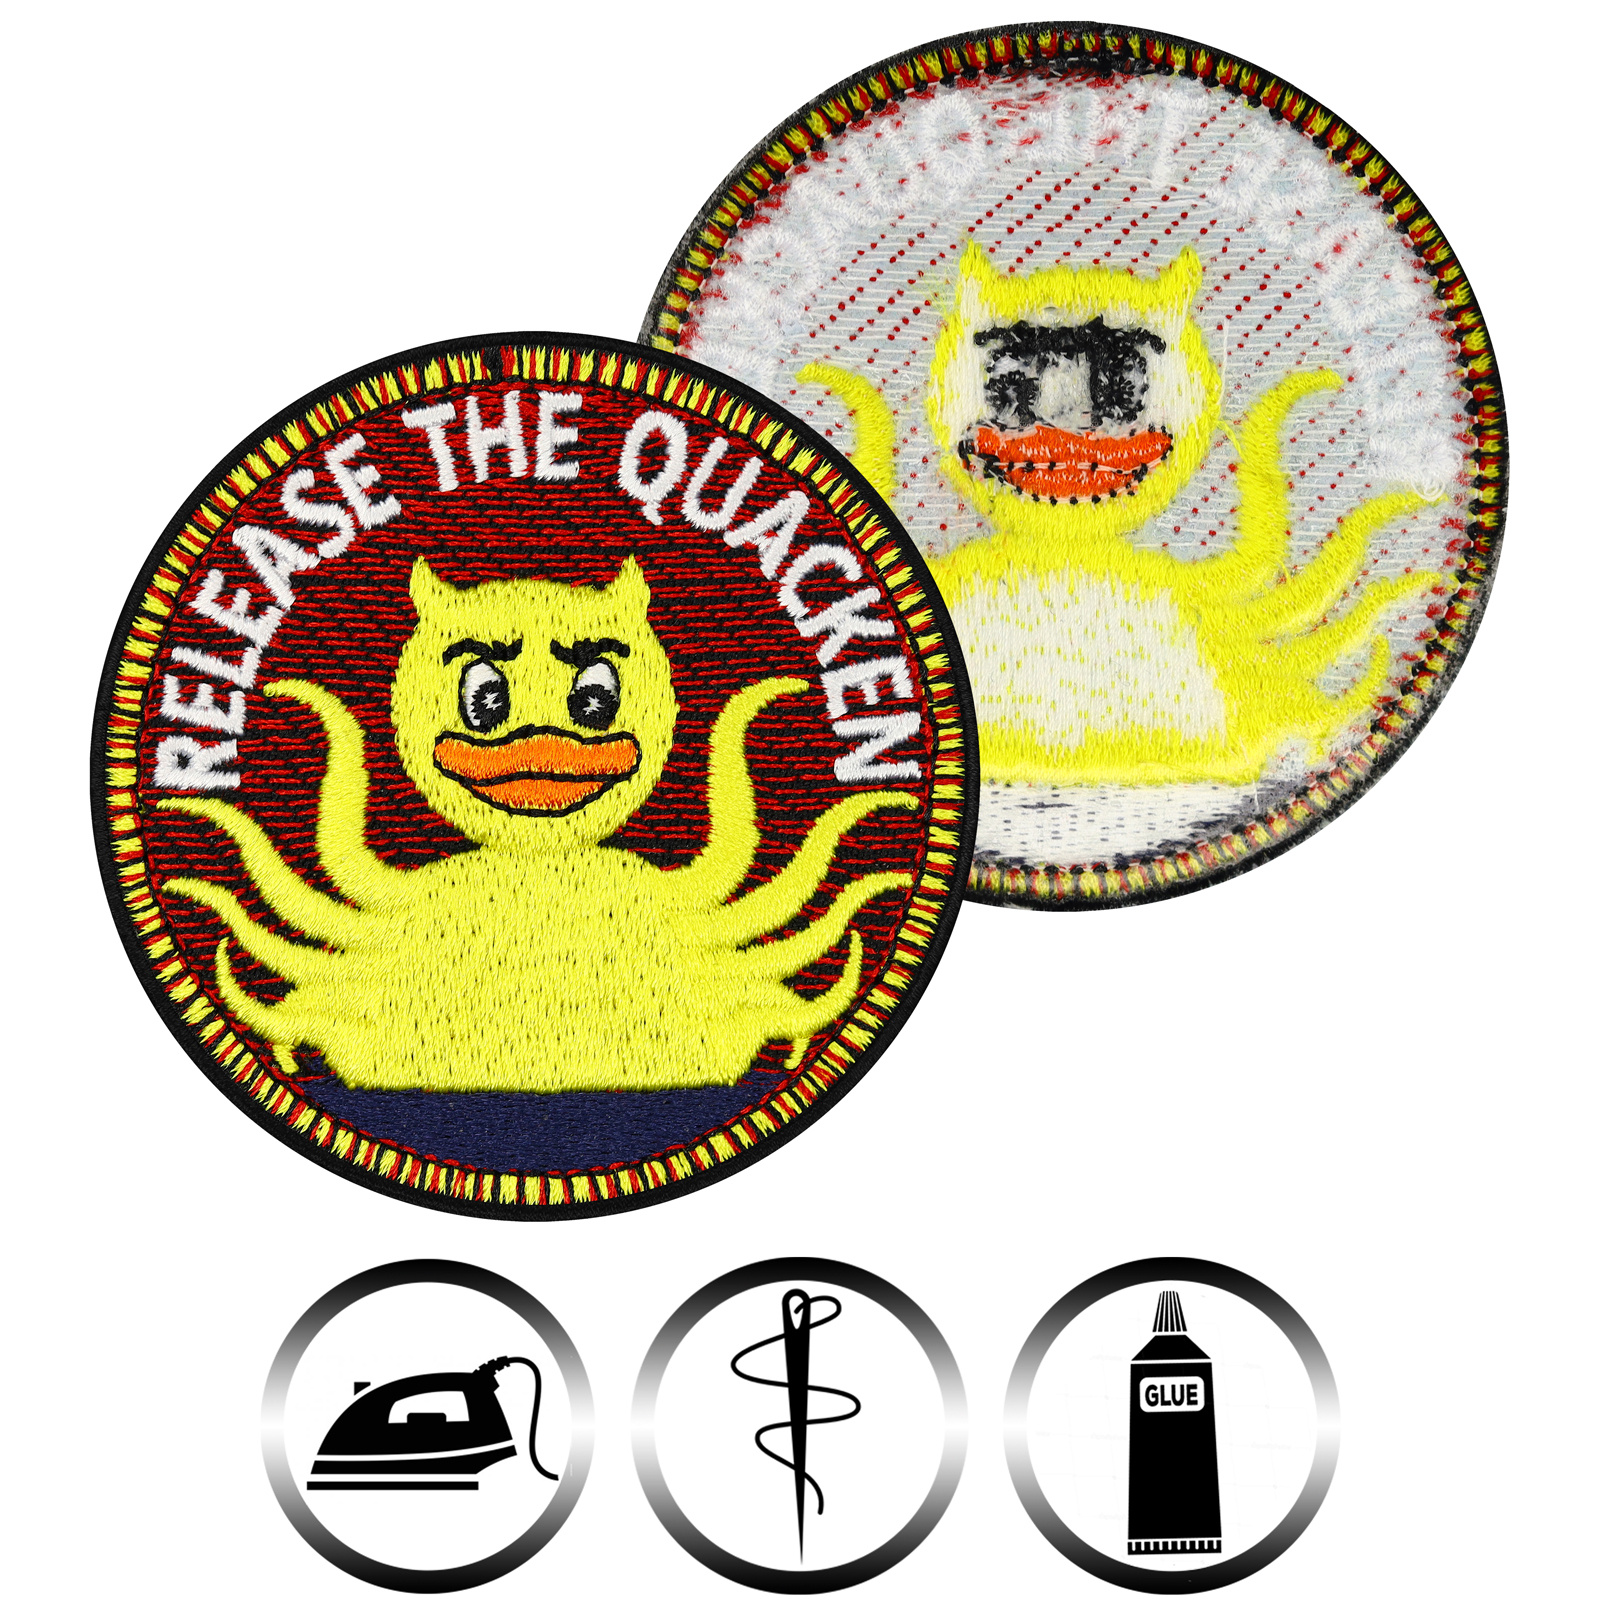 Relase the quacken - Patch